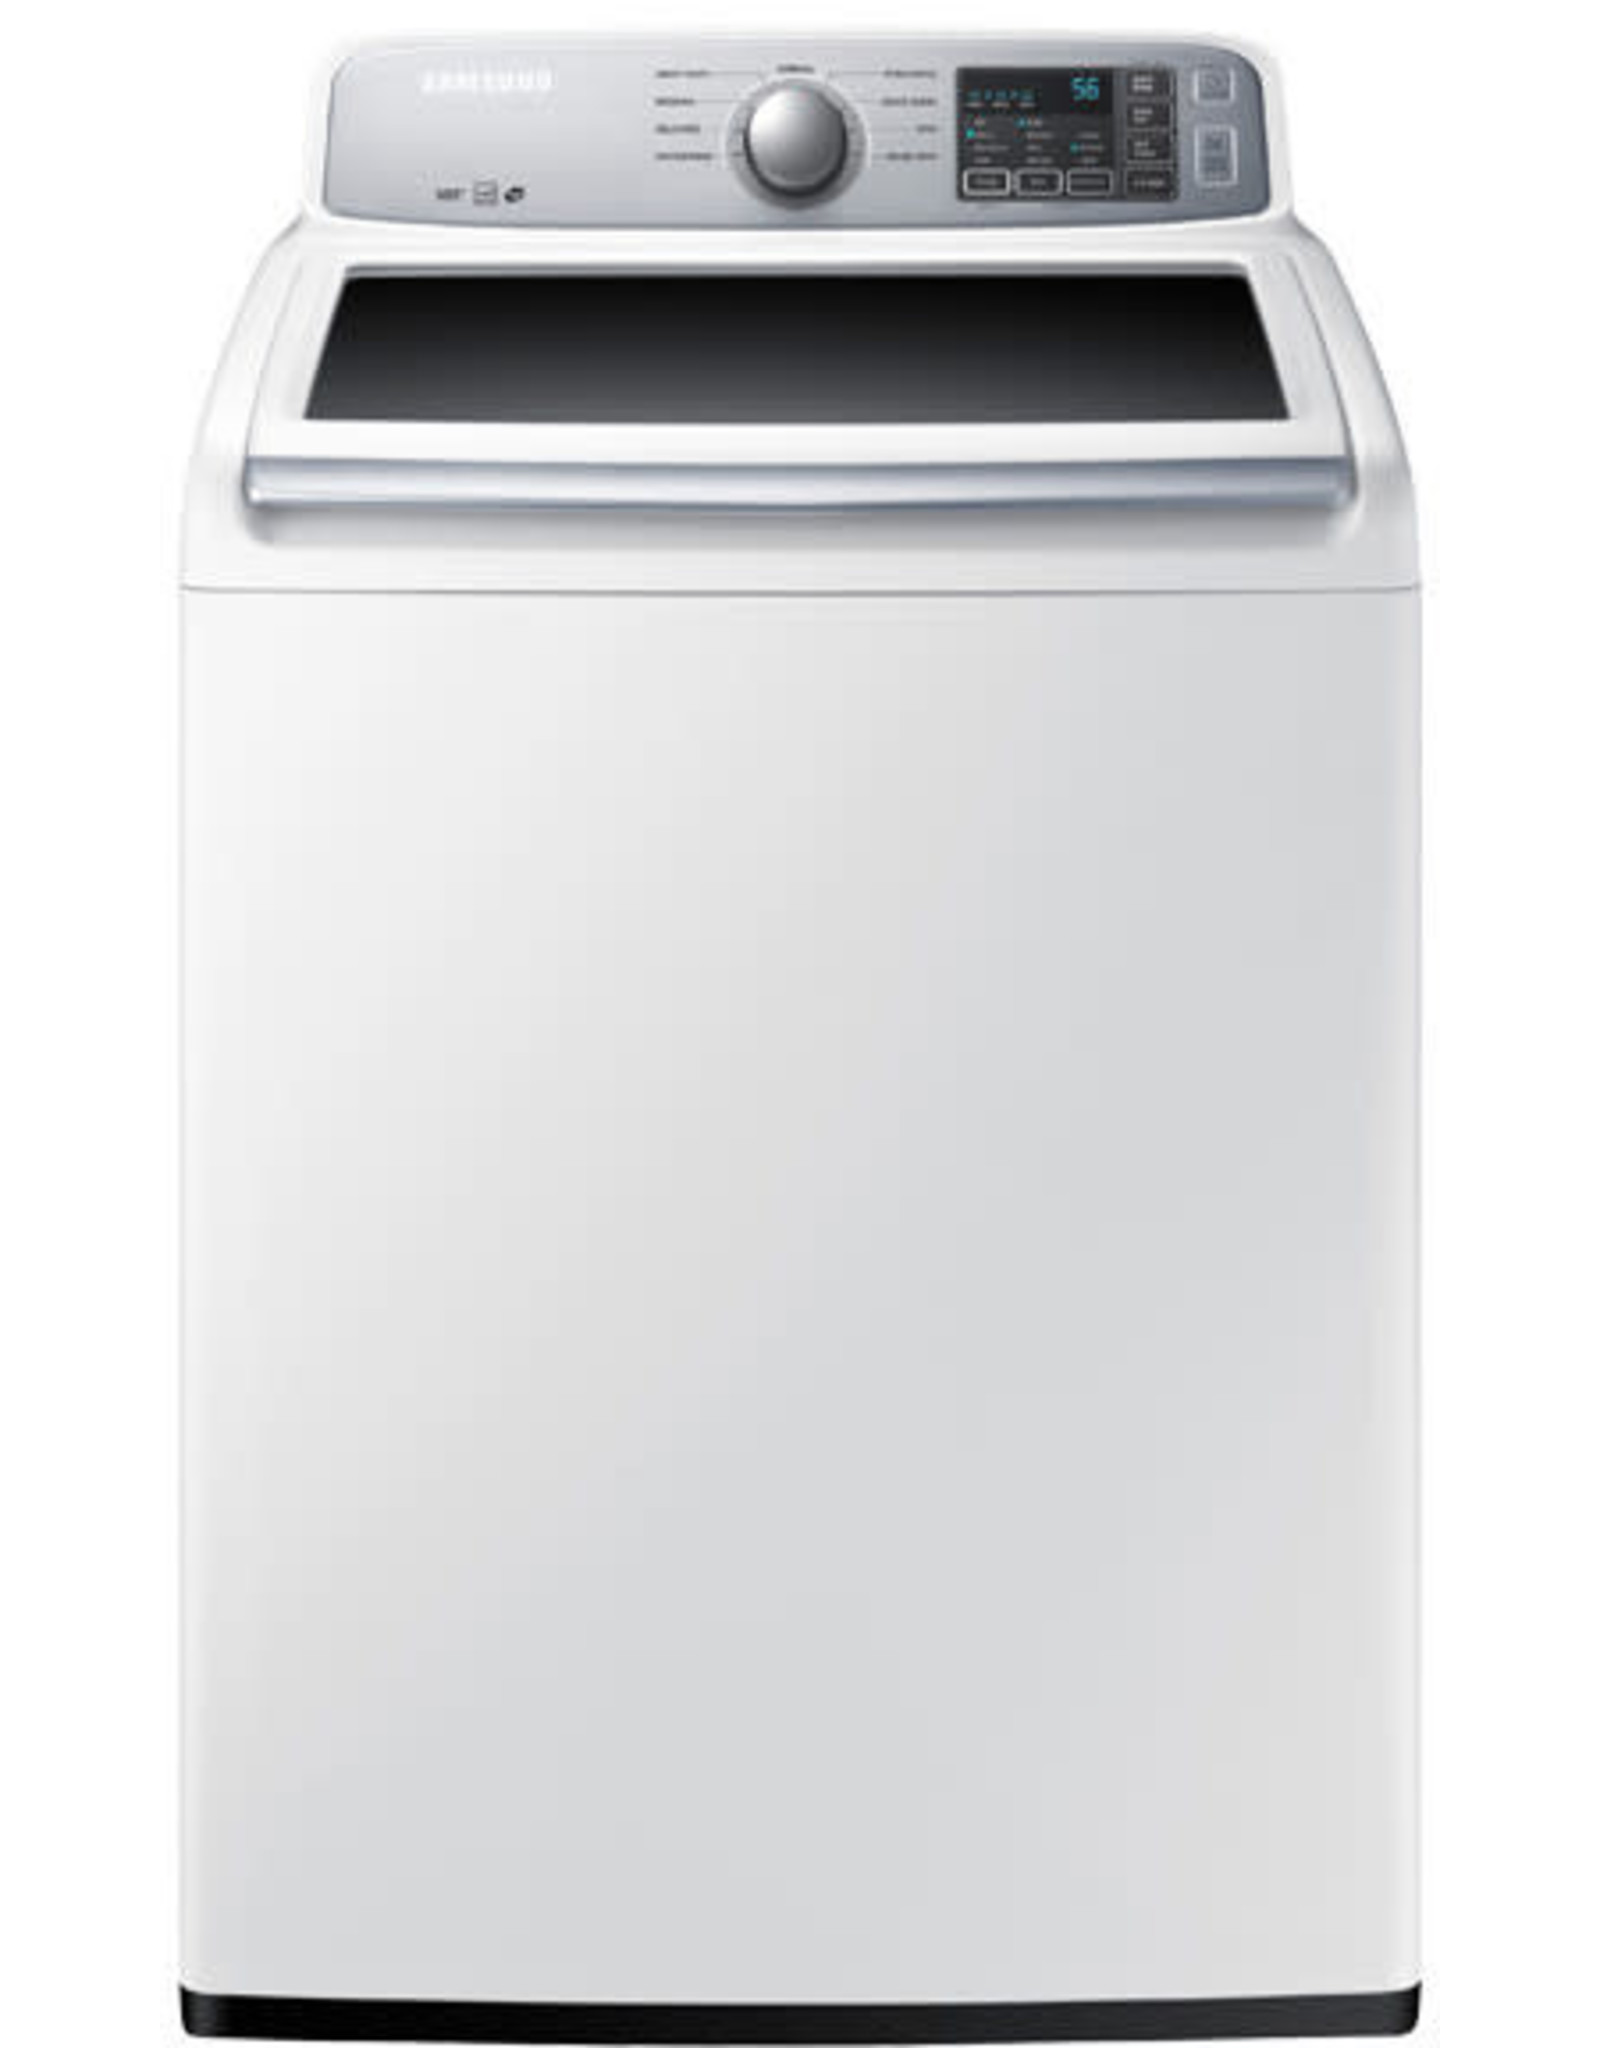 SAMSUNG WA45H7000AW  4.5 cu. ft. Top Load Washer with Vibration Reduction Technology in White